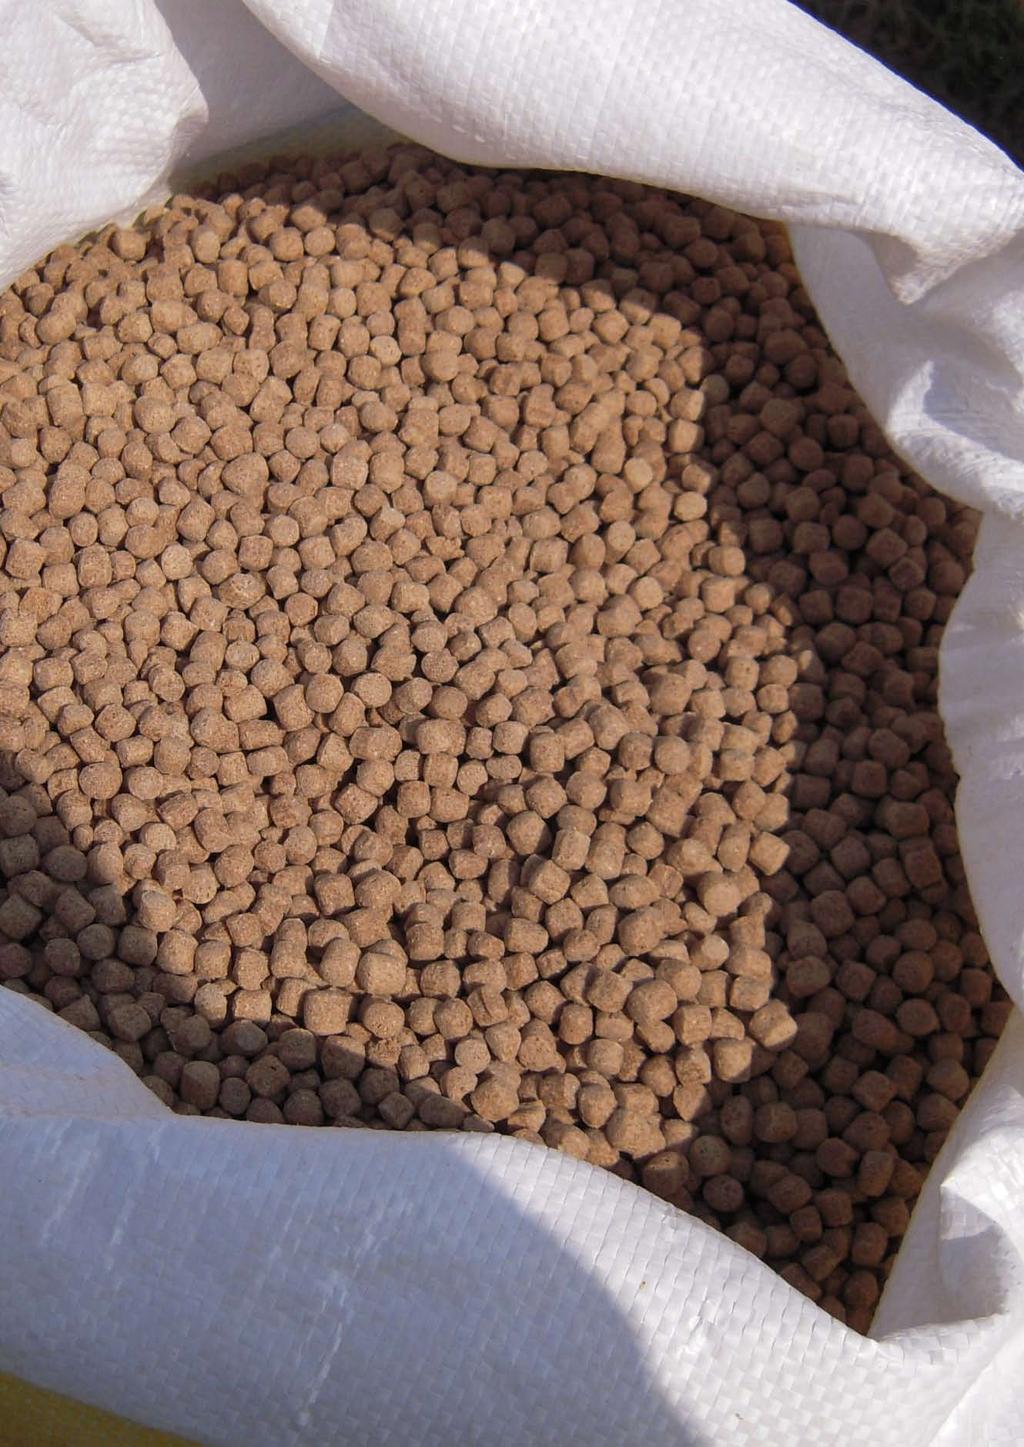 Industrially produced soya-based (28% crude protein) floating pelleted